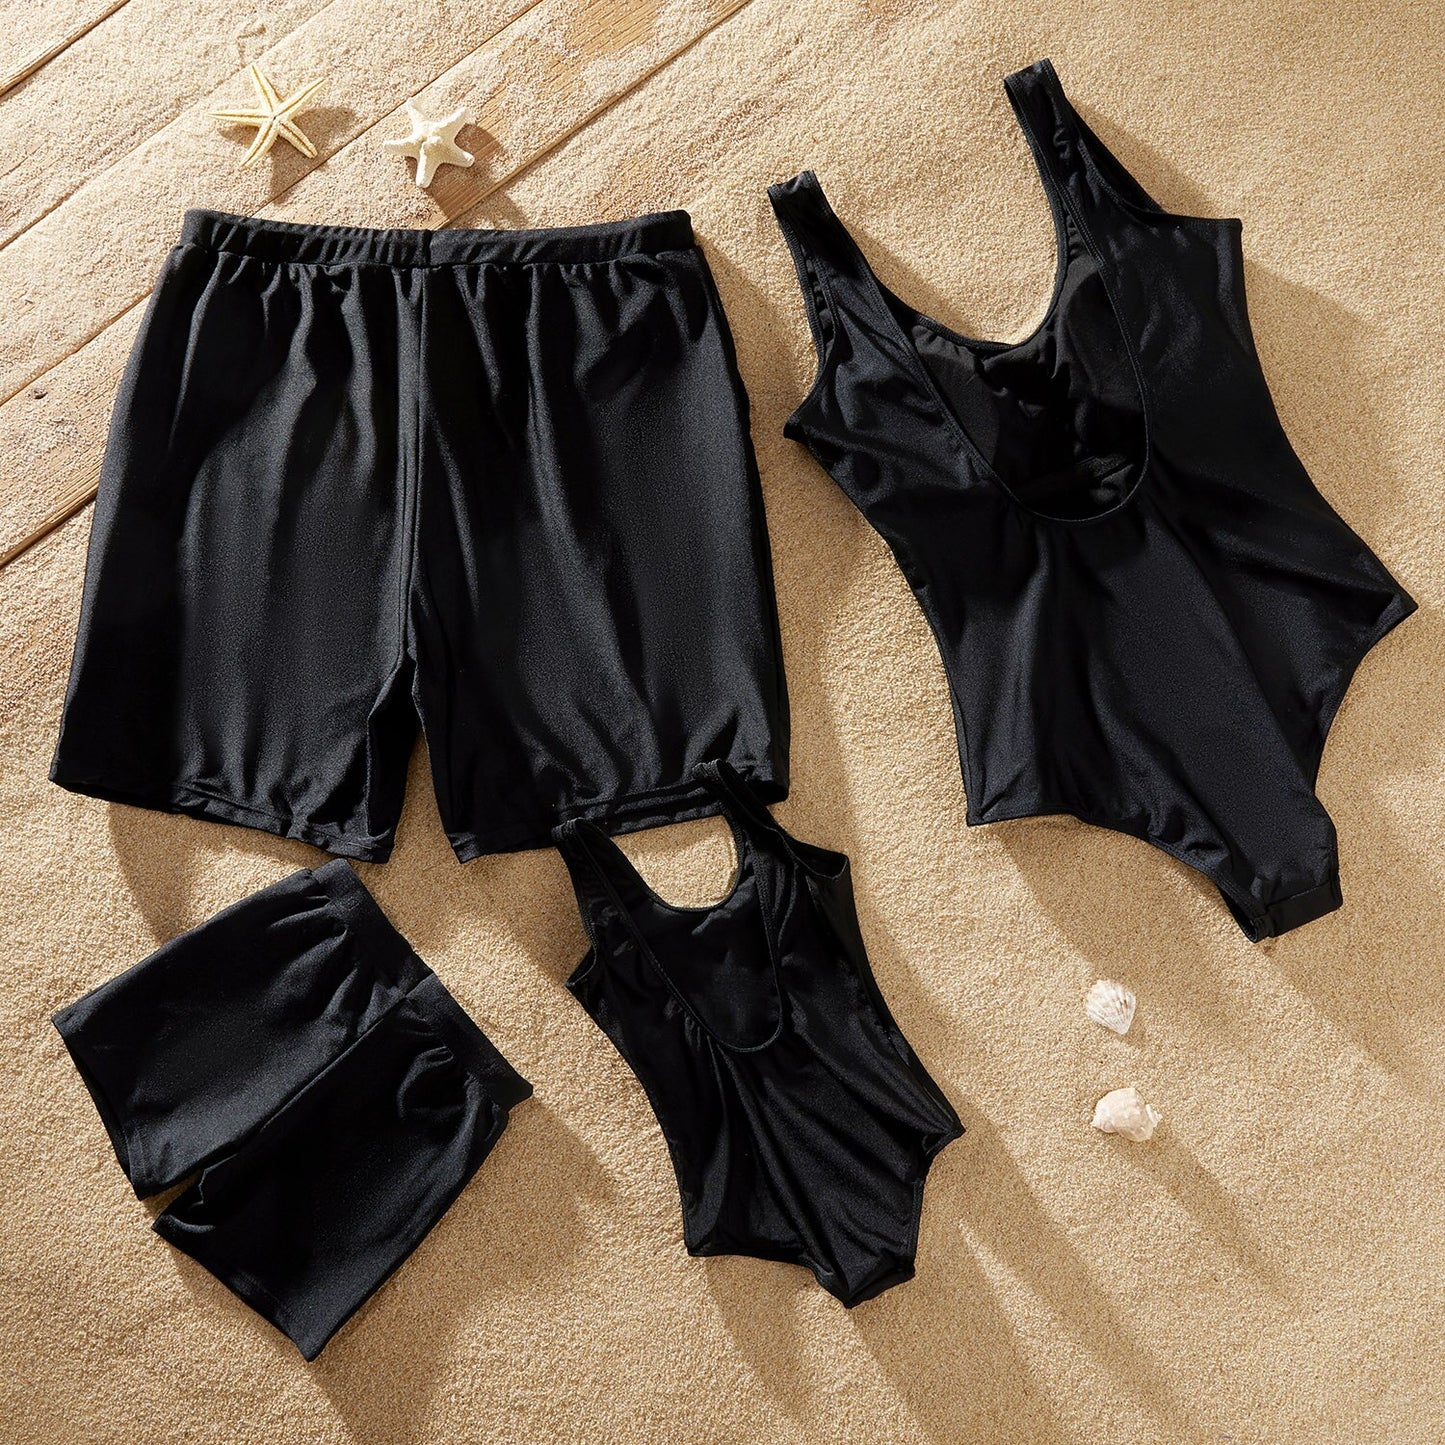 Family Matching! Solid Black "Got it from" One Piece Swimsuits & Trunks